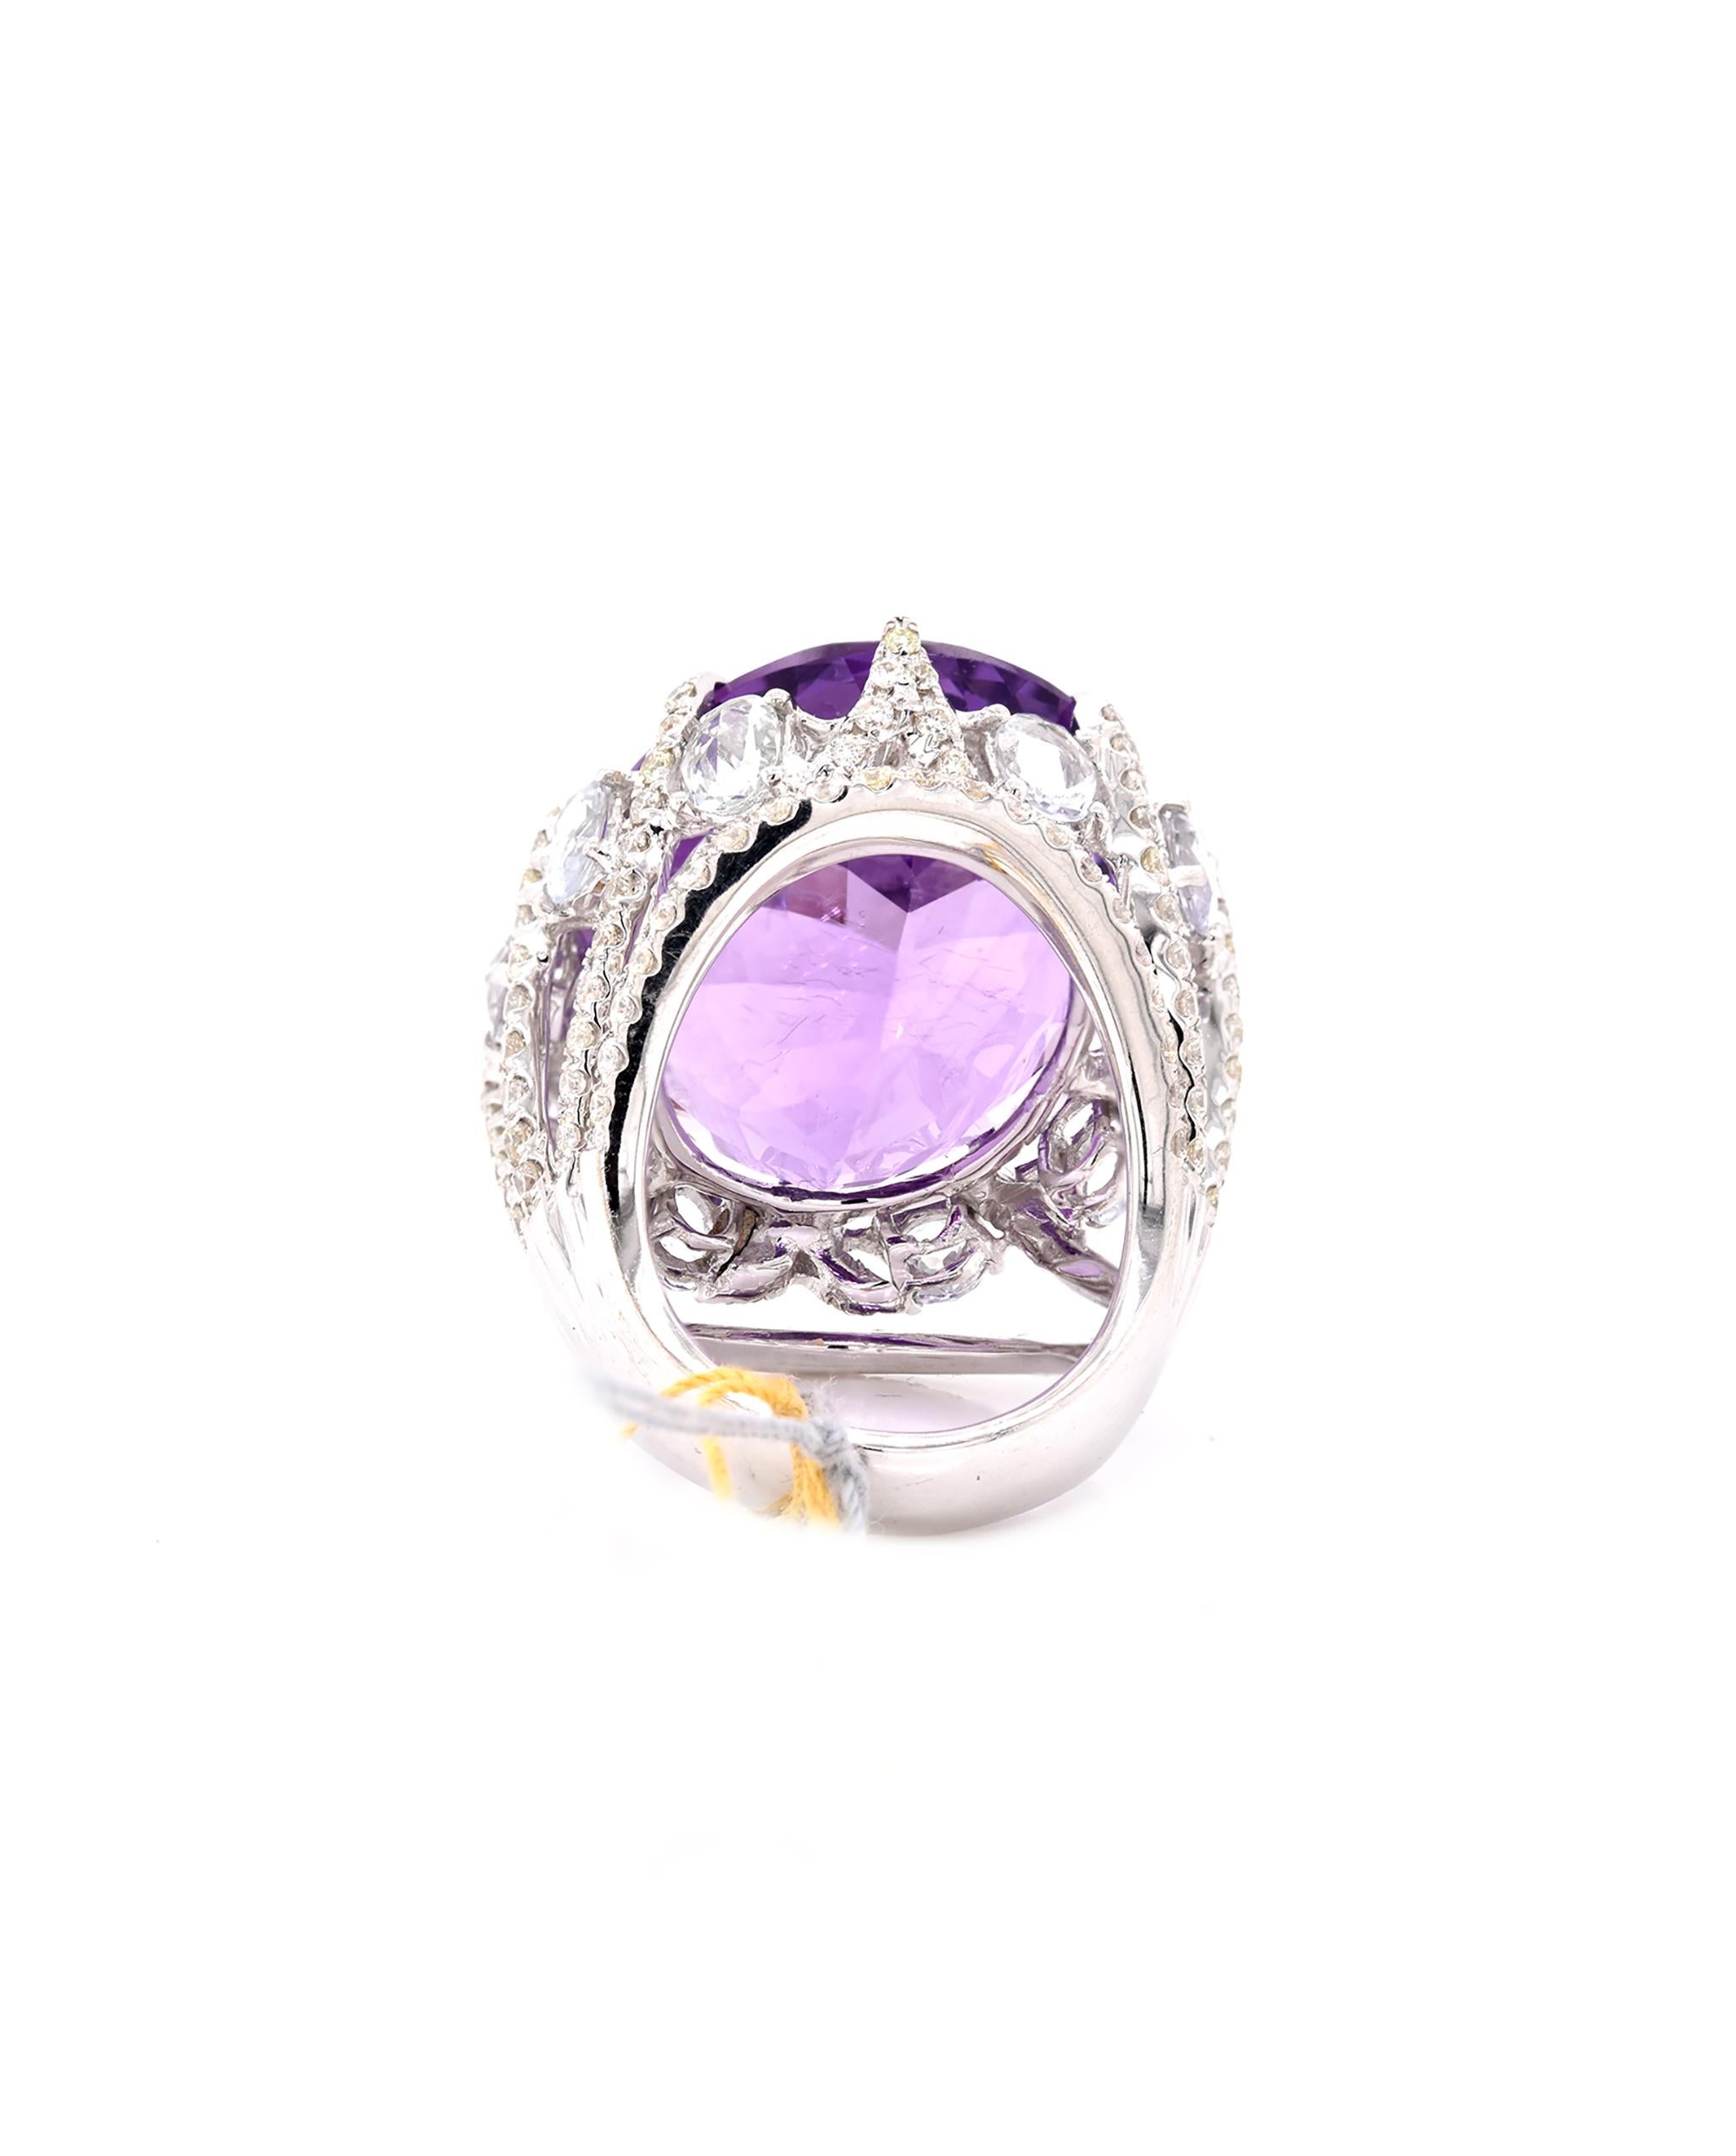 18 Karat White Gold Amethyst, Diamond, and White Sapphire Cocktail Ring In Excellent Condition For Sale In Scottsdale, AZ